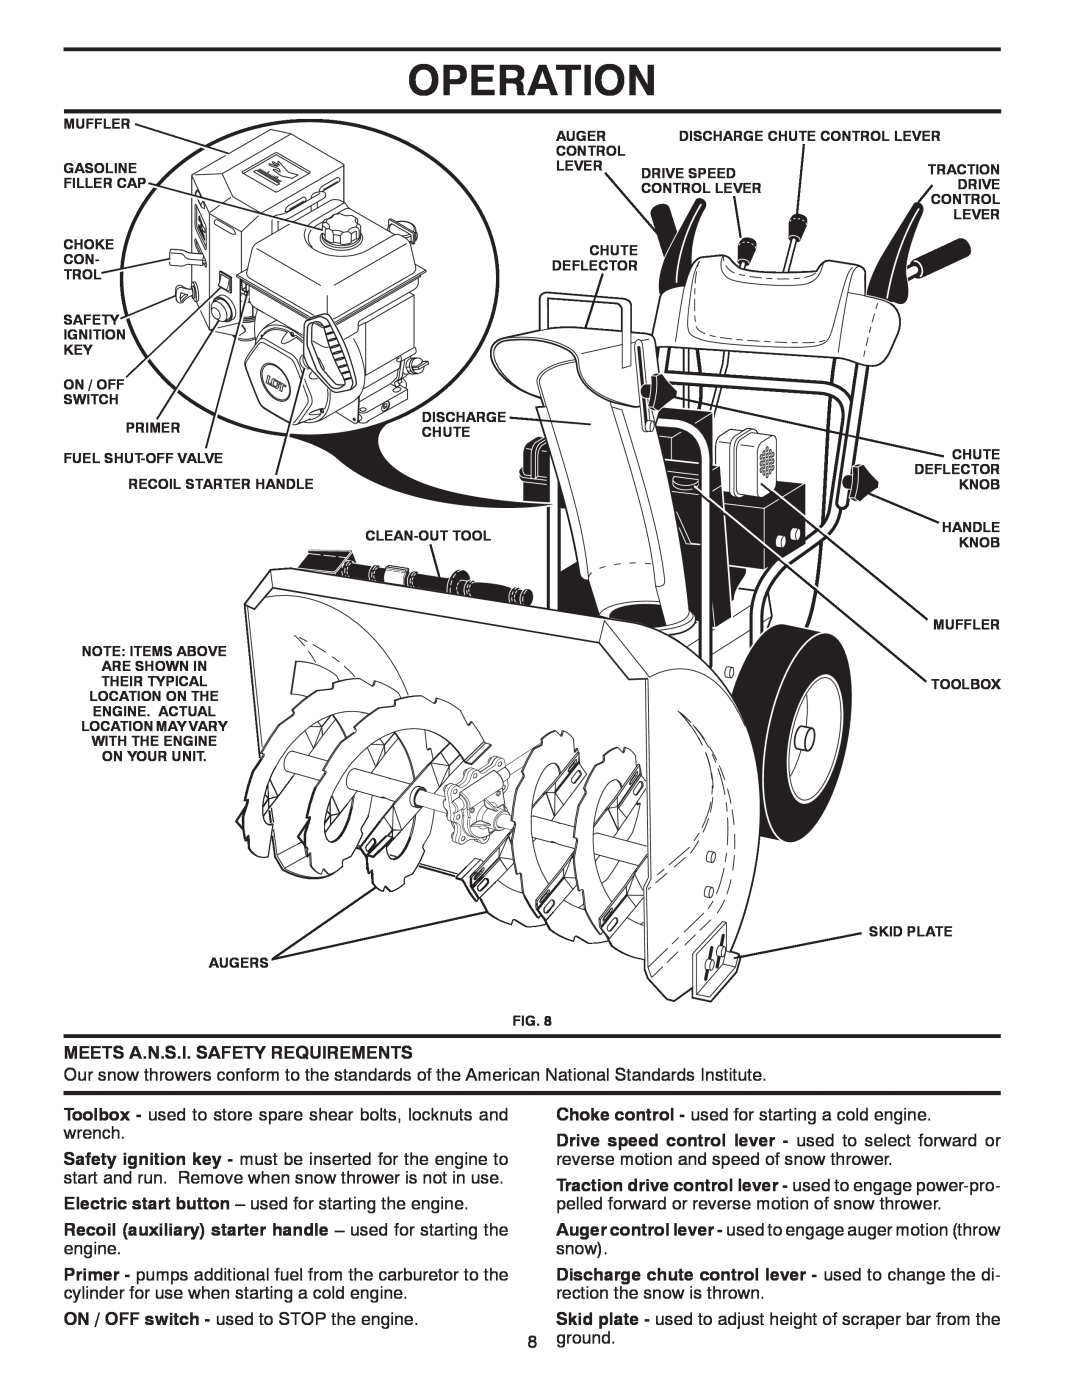 Poulan 435356 owner manual Operation, Meets A.N.S.I. Safety Requirements, ON / OFF switch - used to STOP the engine, ground 